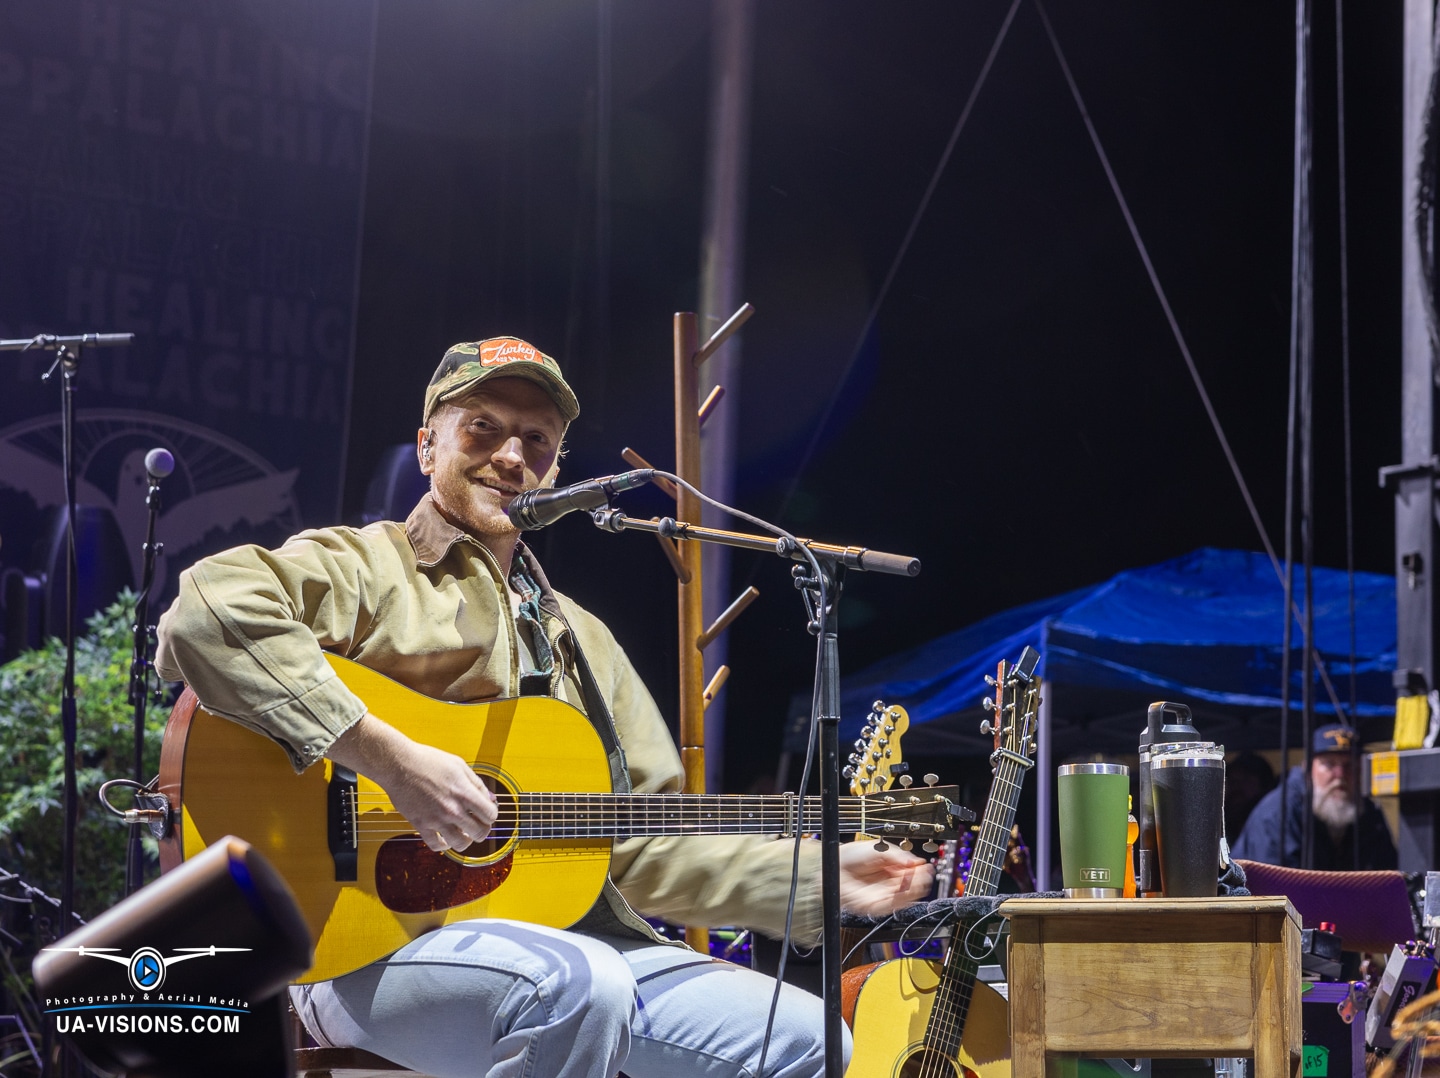 Tyler Childers captures the audience with a soulful guitar performance at Healing Appalachia.